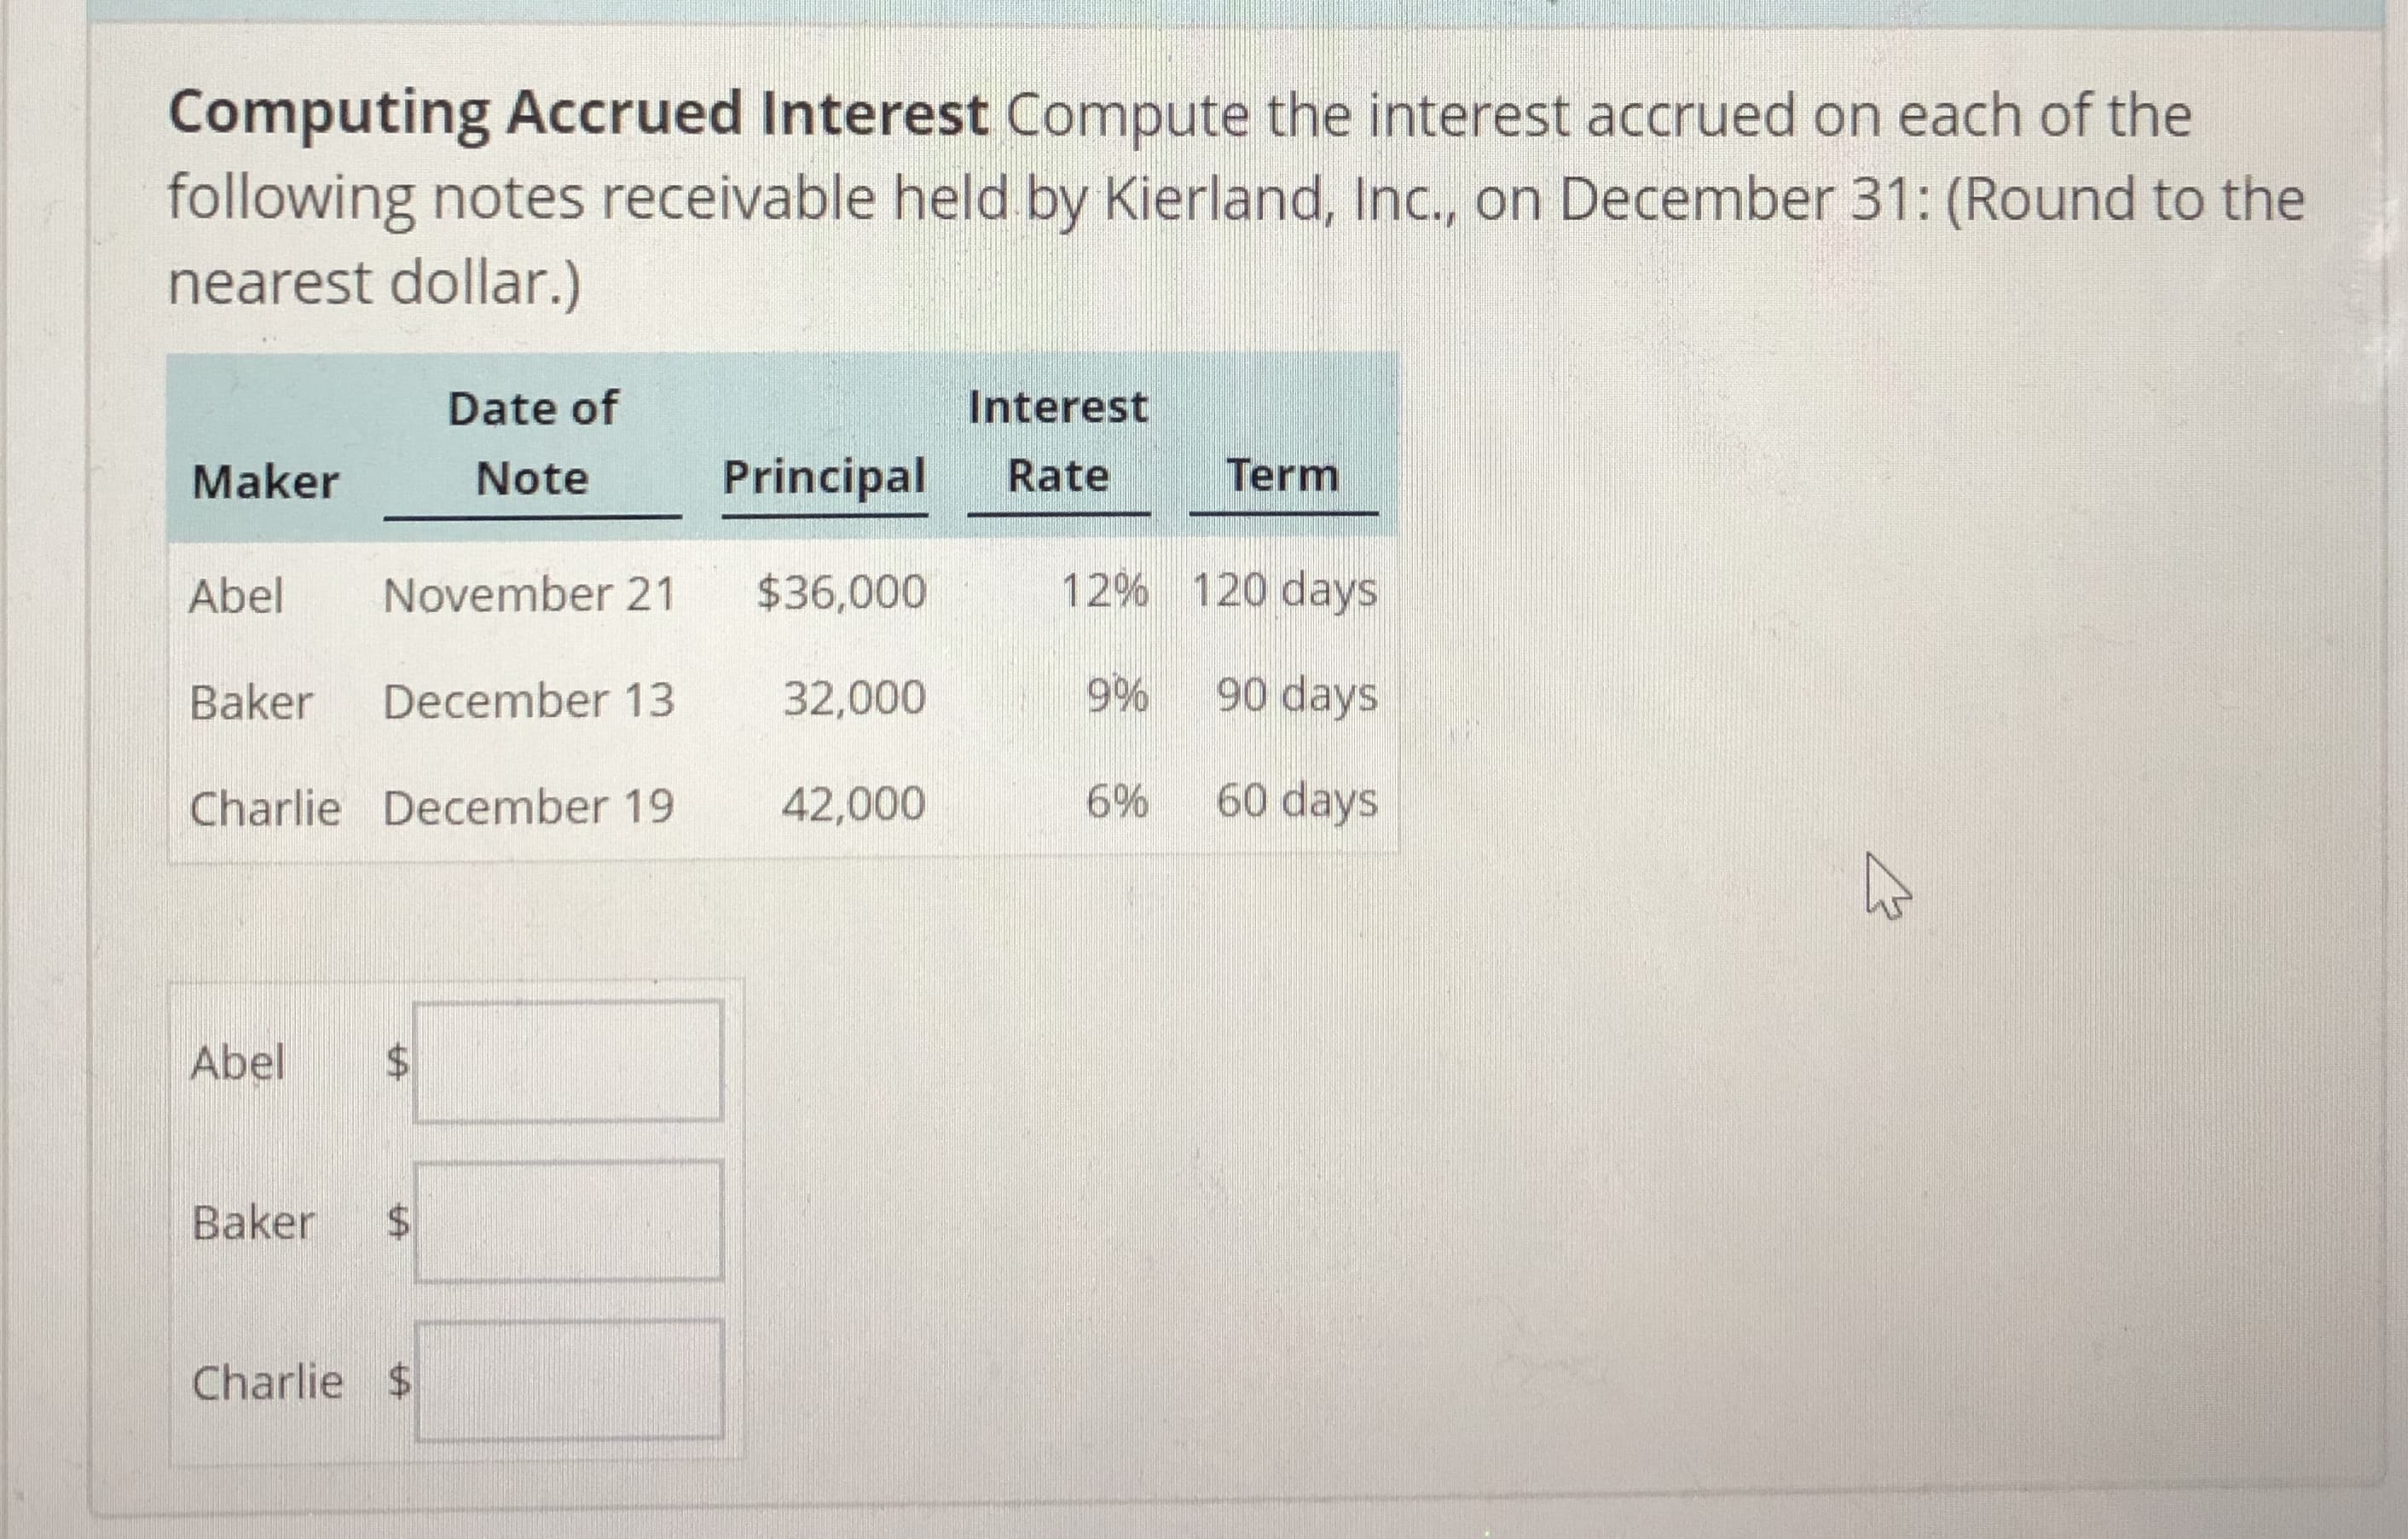 Computing Accrued Interest Compute the interest accrued on each of the
following notes receivable held by Kierland, Inc, on December 31: (Round to the
nearest dollar.)
Date of
Interest
Principal RateTerm
Maker
Abel November 21 $36,000 12% 120 days
Baker December 13 32,000 996 90 days!
Charlie December 19 42,000 6% 60 days!
Note
Abel
Baker $
Charlie
